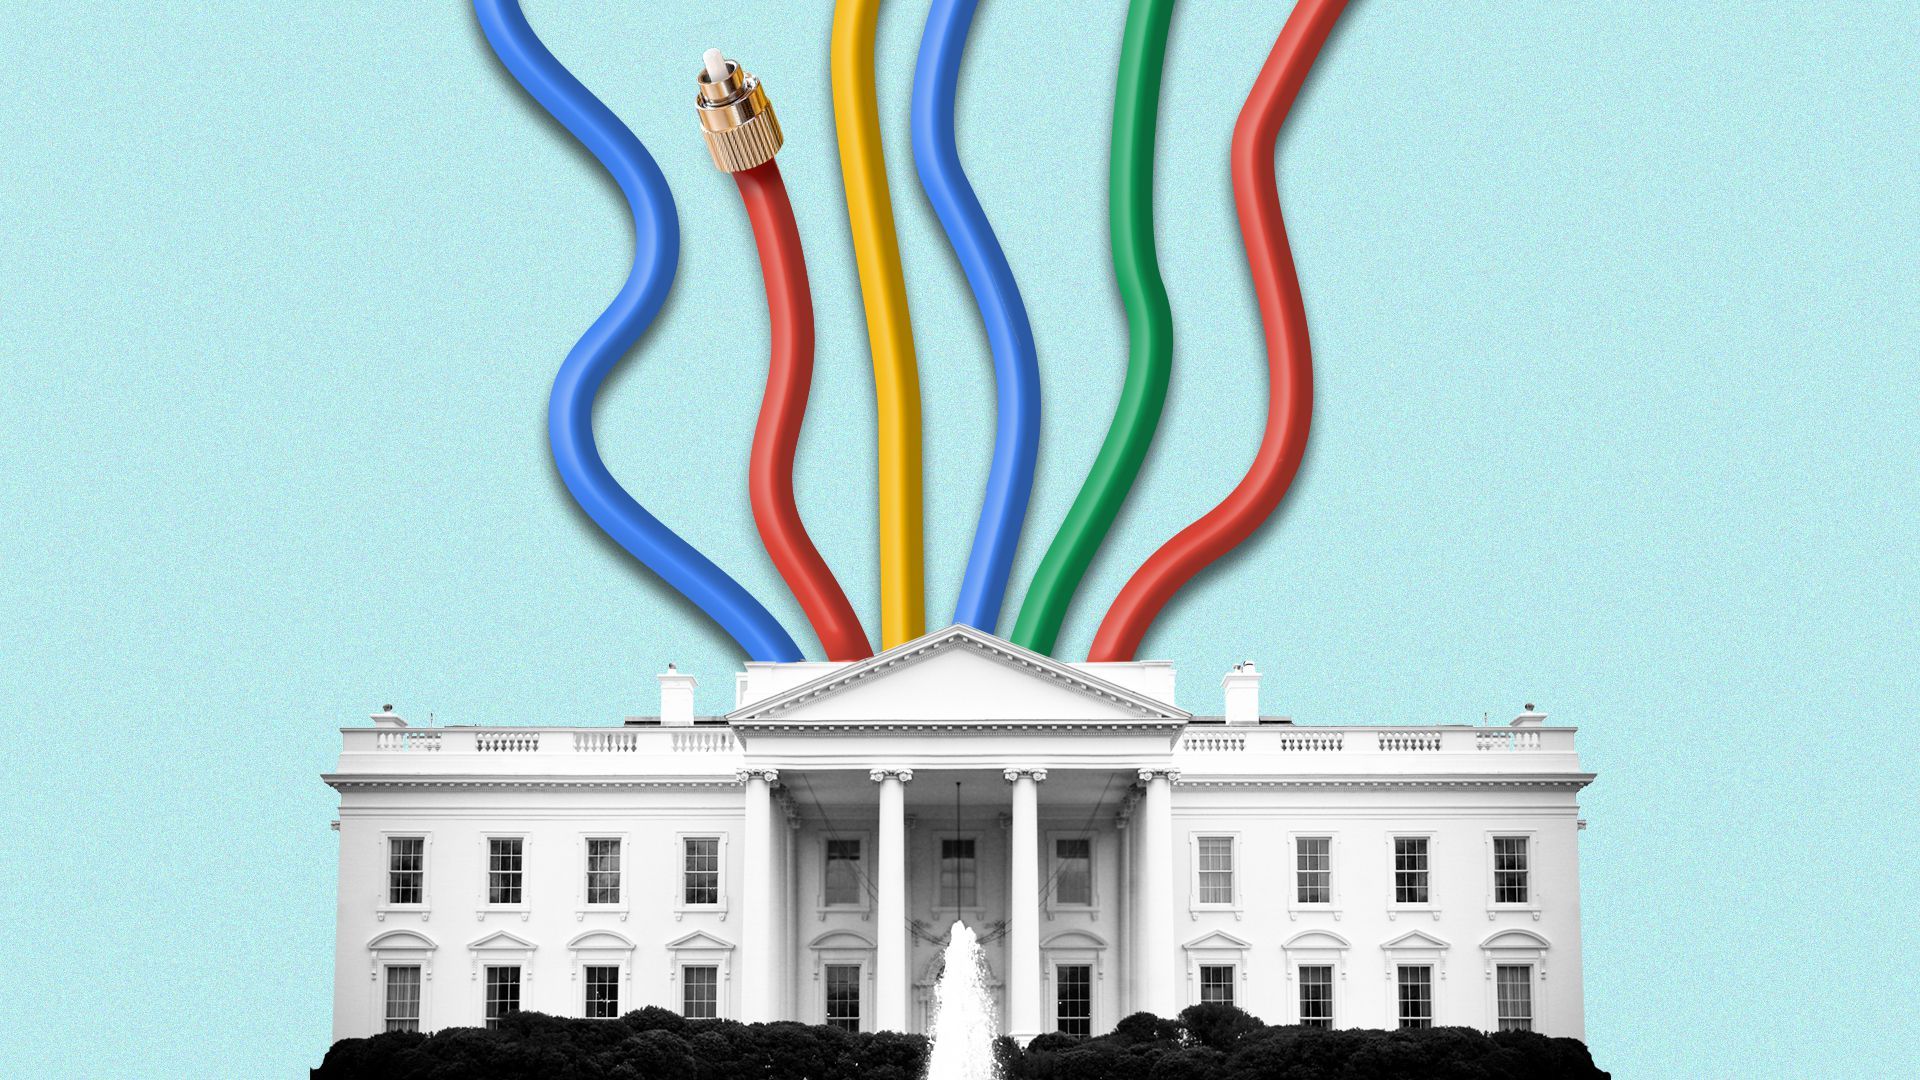 Illustration of fiber optic cables coming out of the White House.